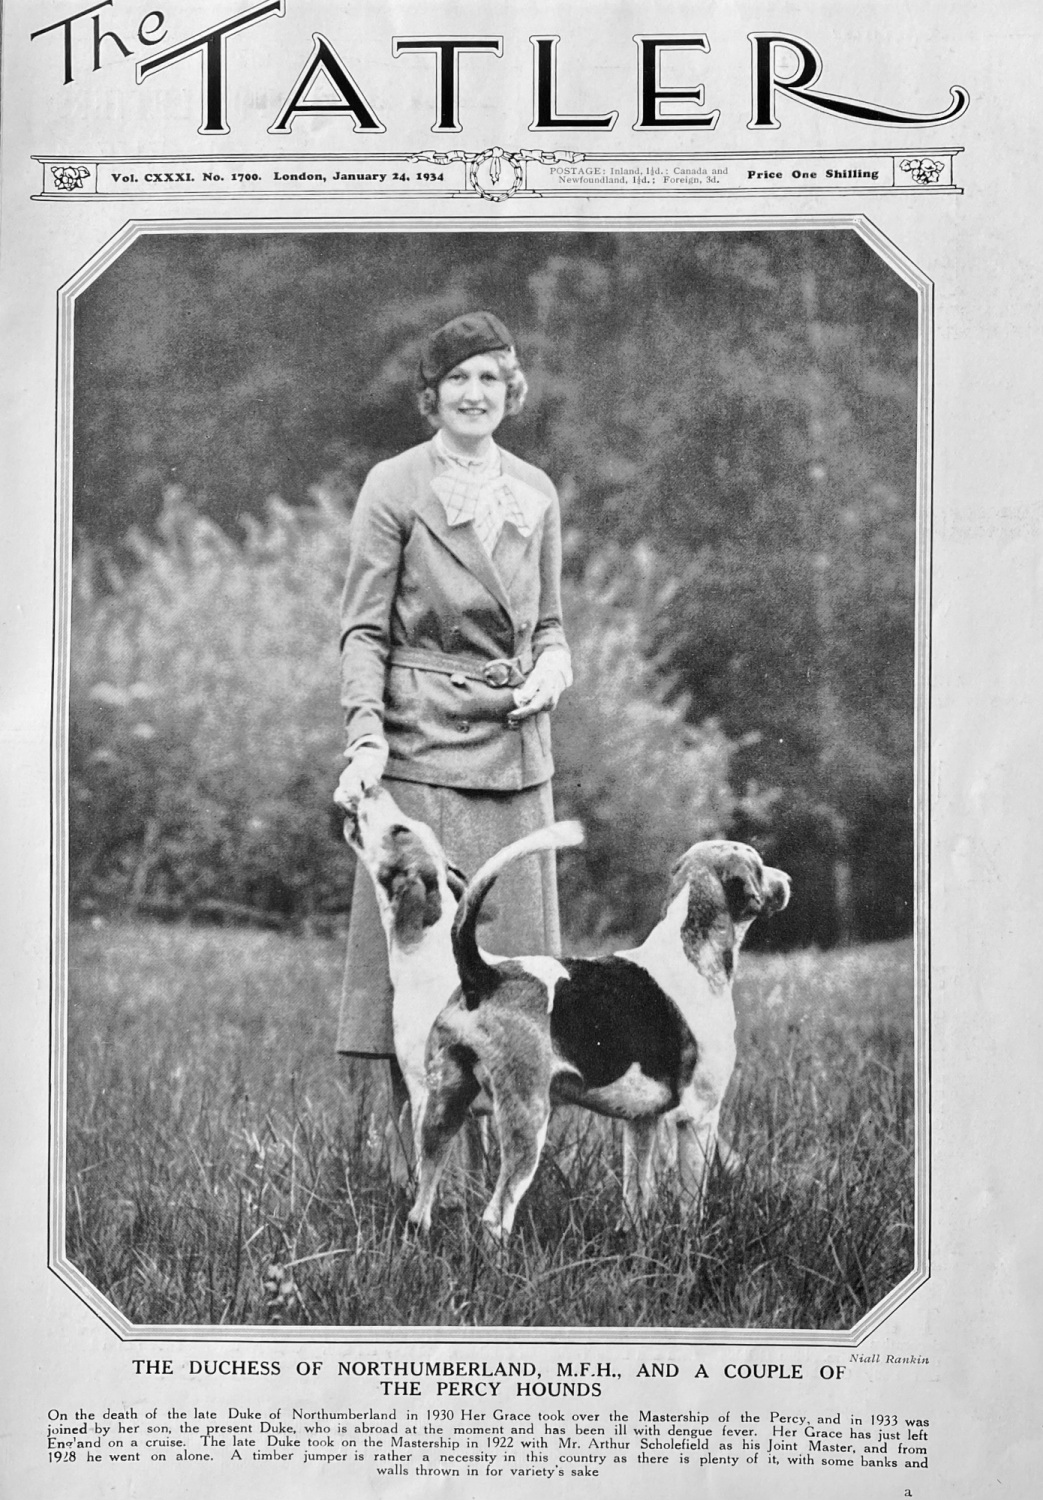 The Duchess of Northumberland M.F.H., and a couple of the Percy Hounds.  19